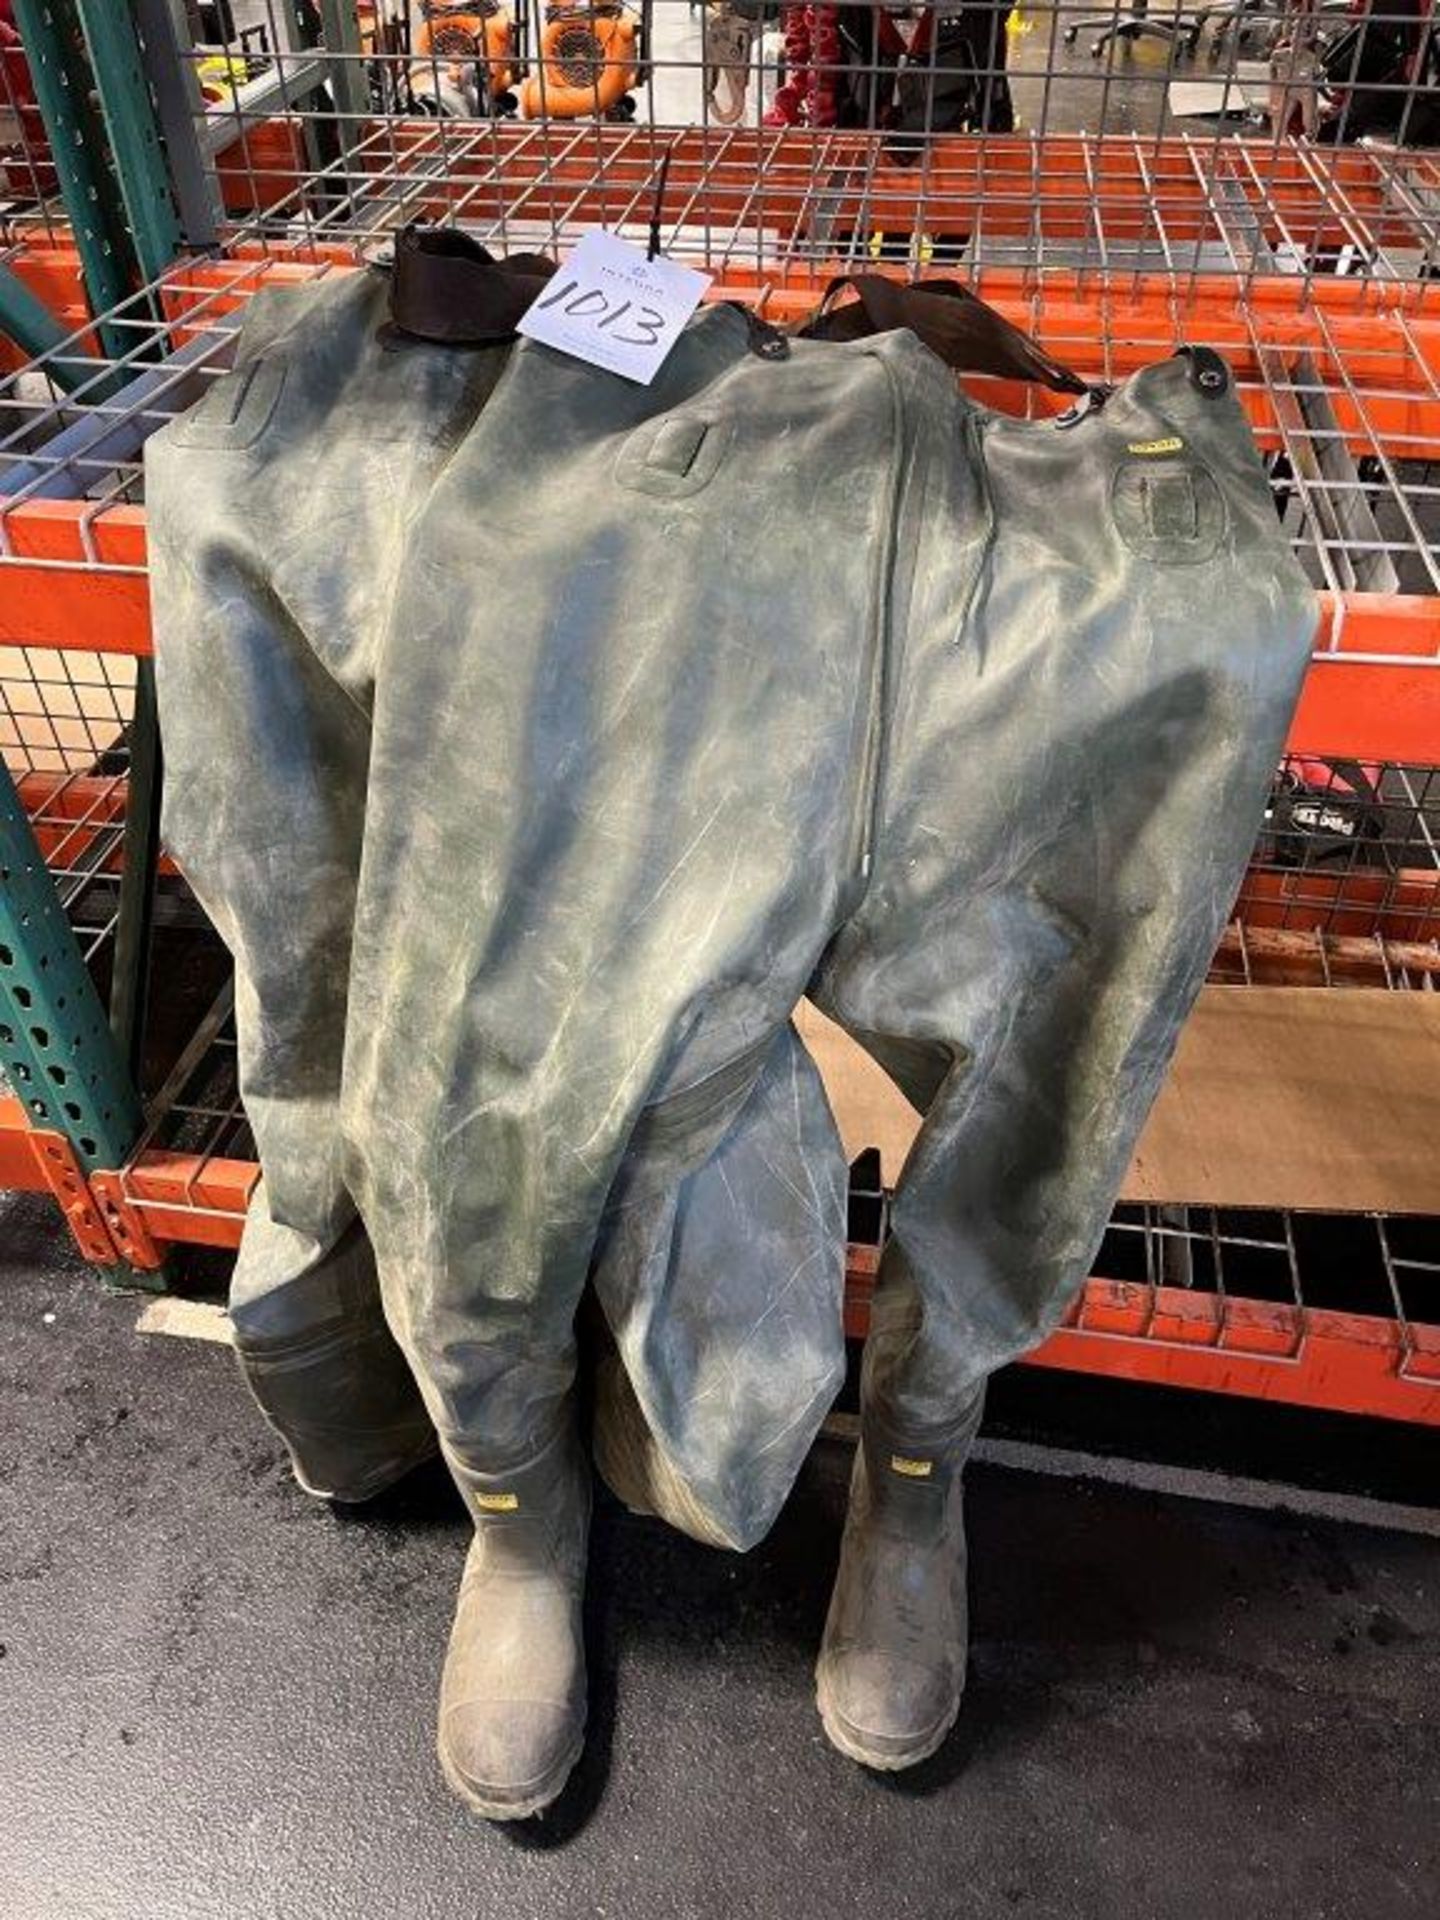 (2) Pair of Ranger Size 12 Rubber Chest Waders